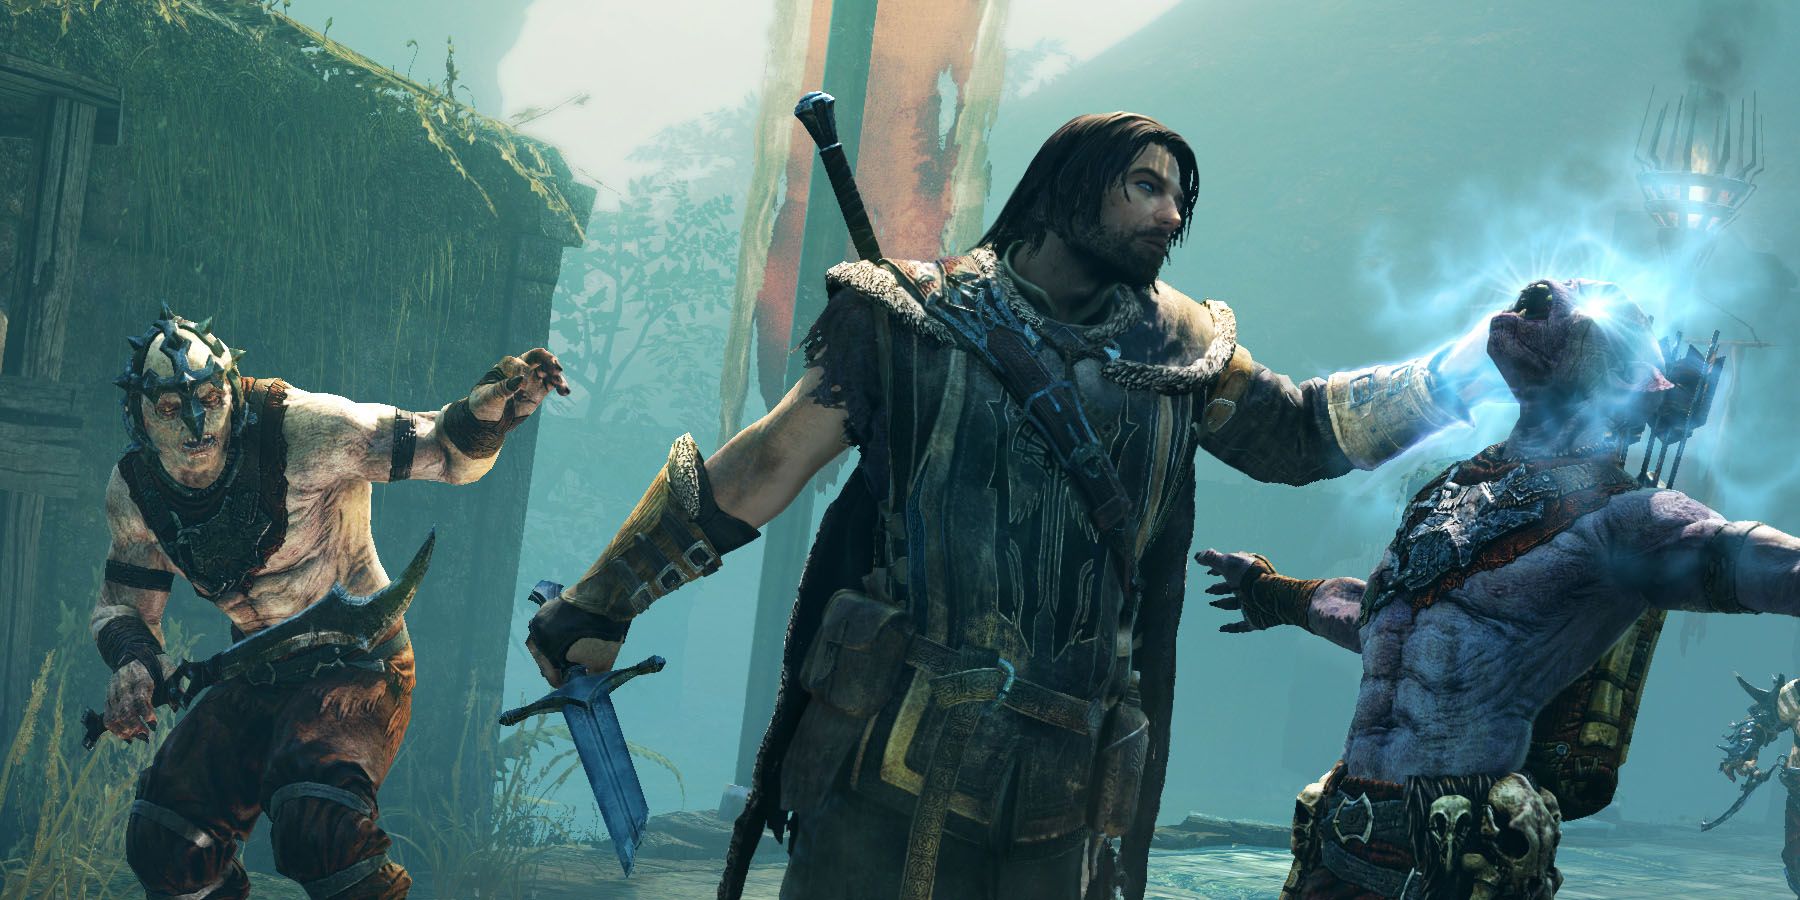 Finishing off an opponent in Shadow of Mordor